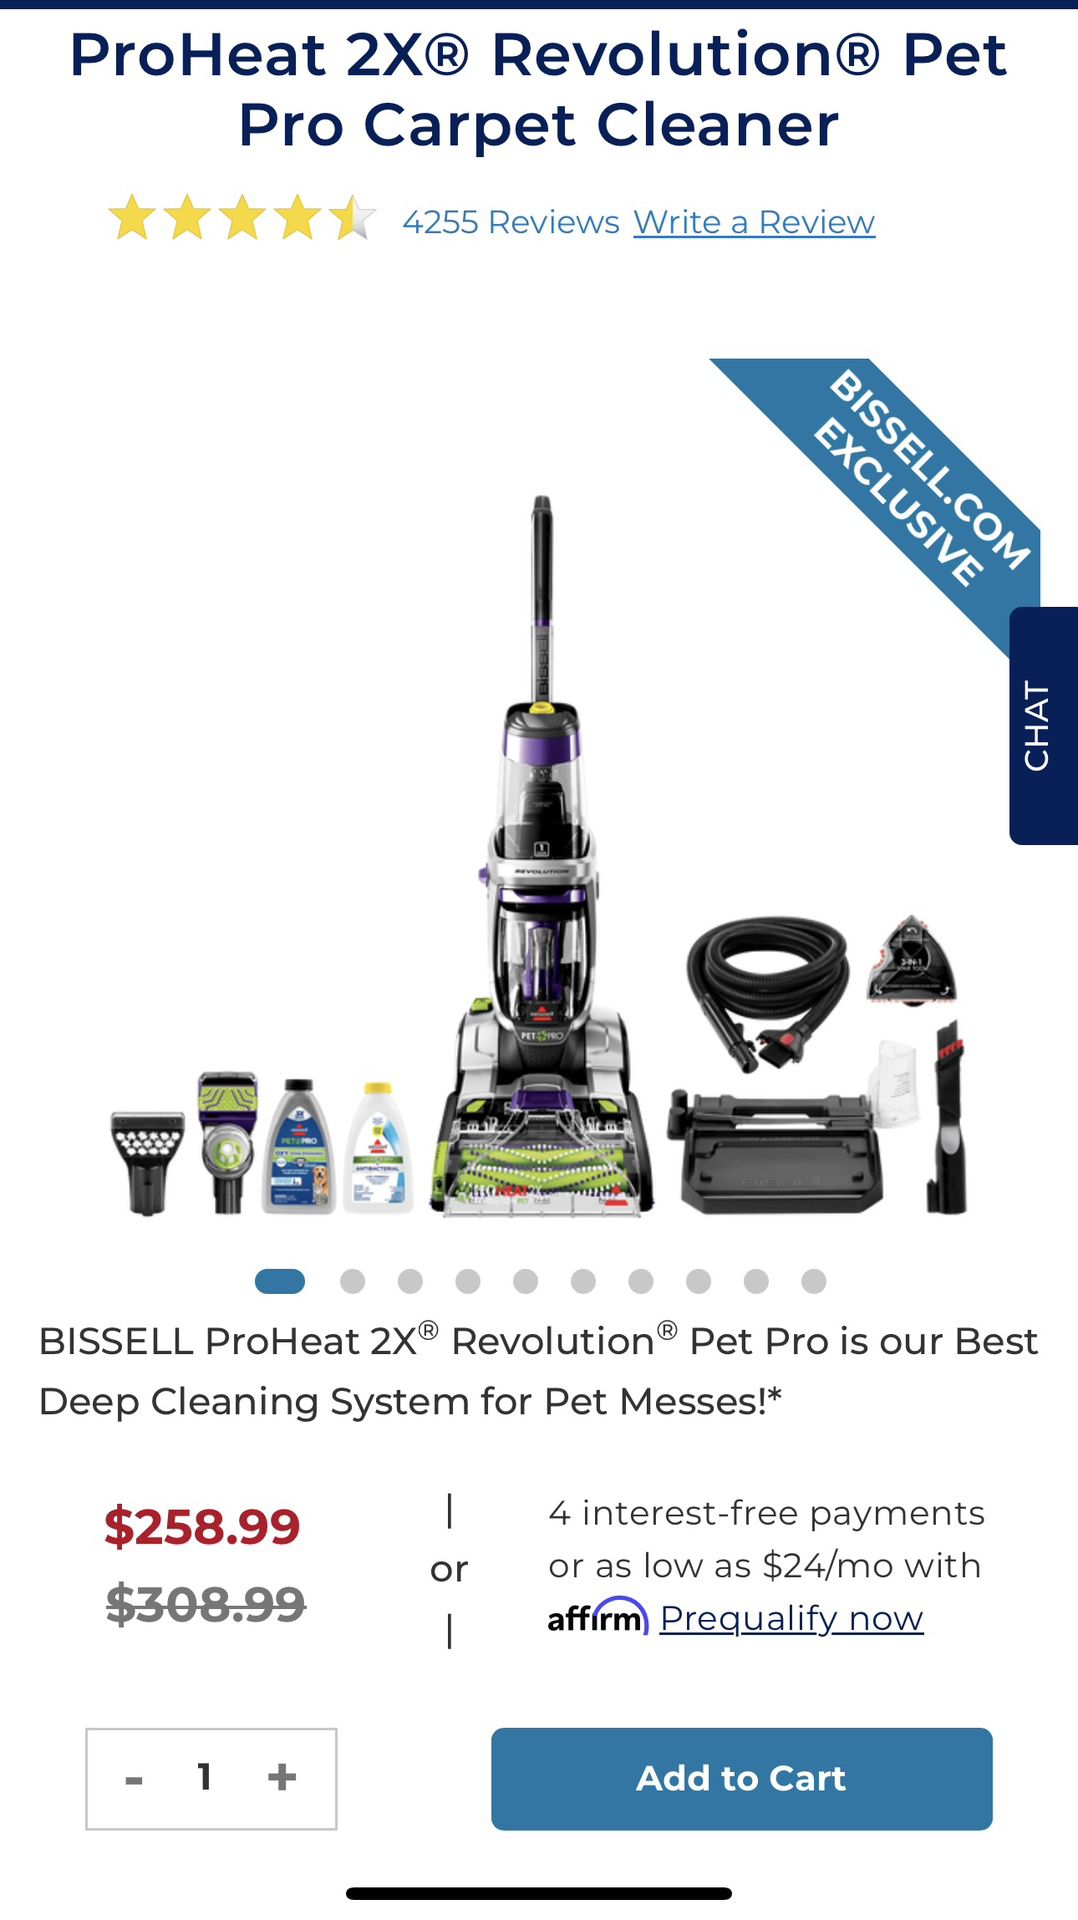 Bissell ProHeat 2X Pet Pro Carpet Cleaner